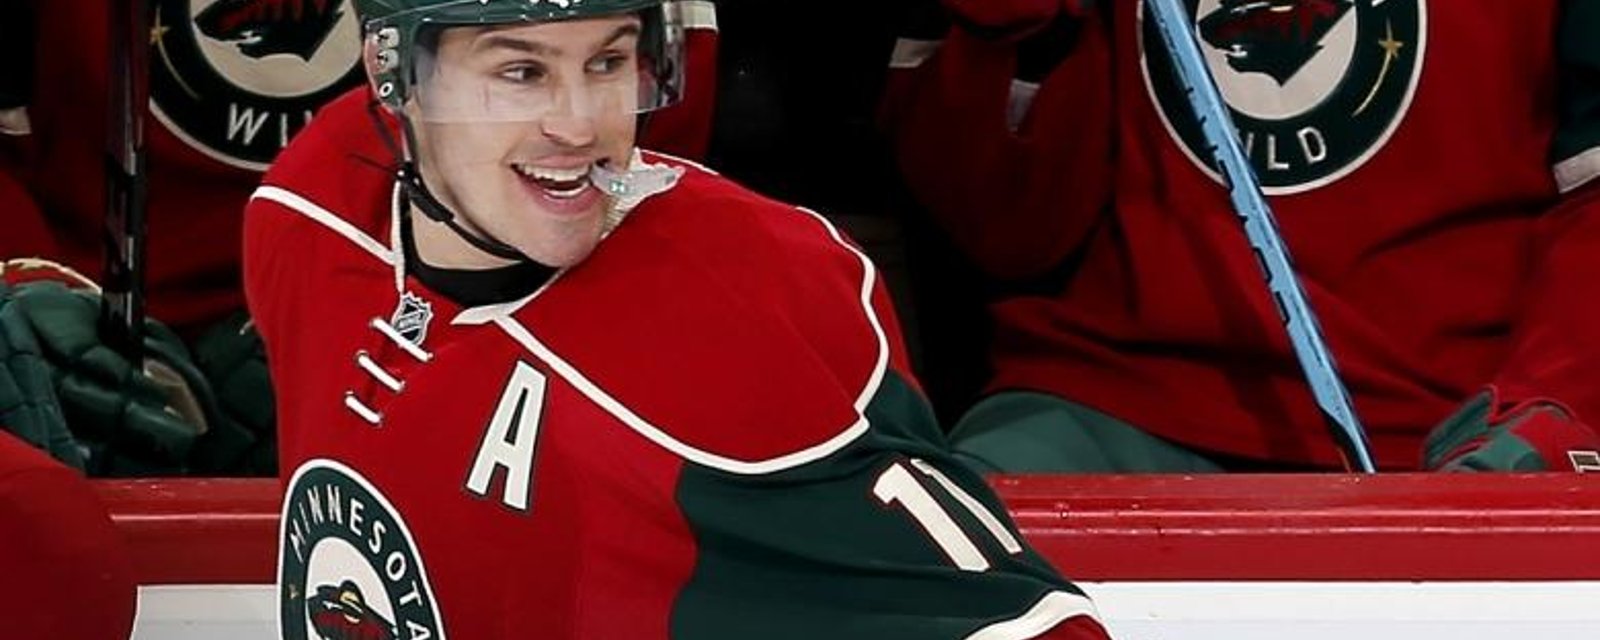 A devastating blow for the Minnesota Wild right before the playoffs.